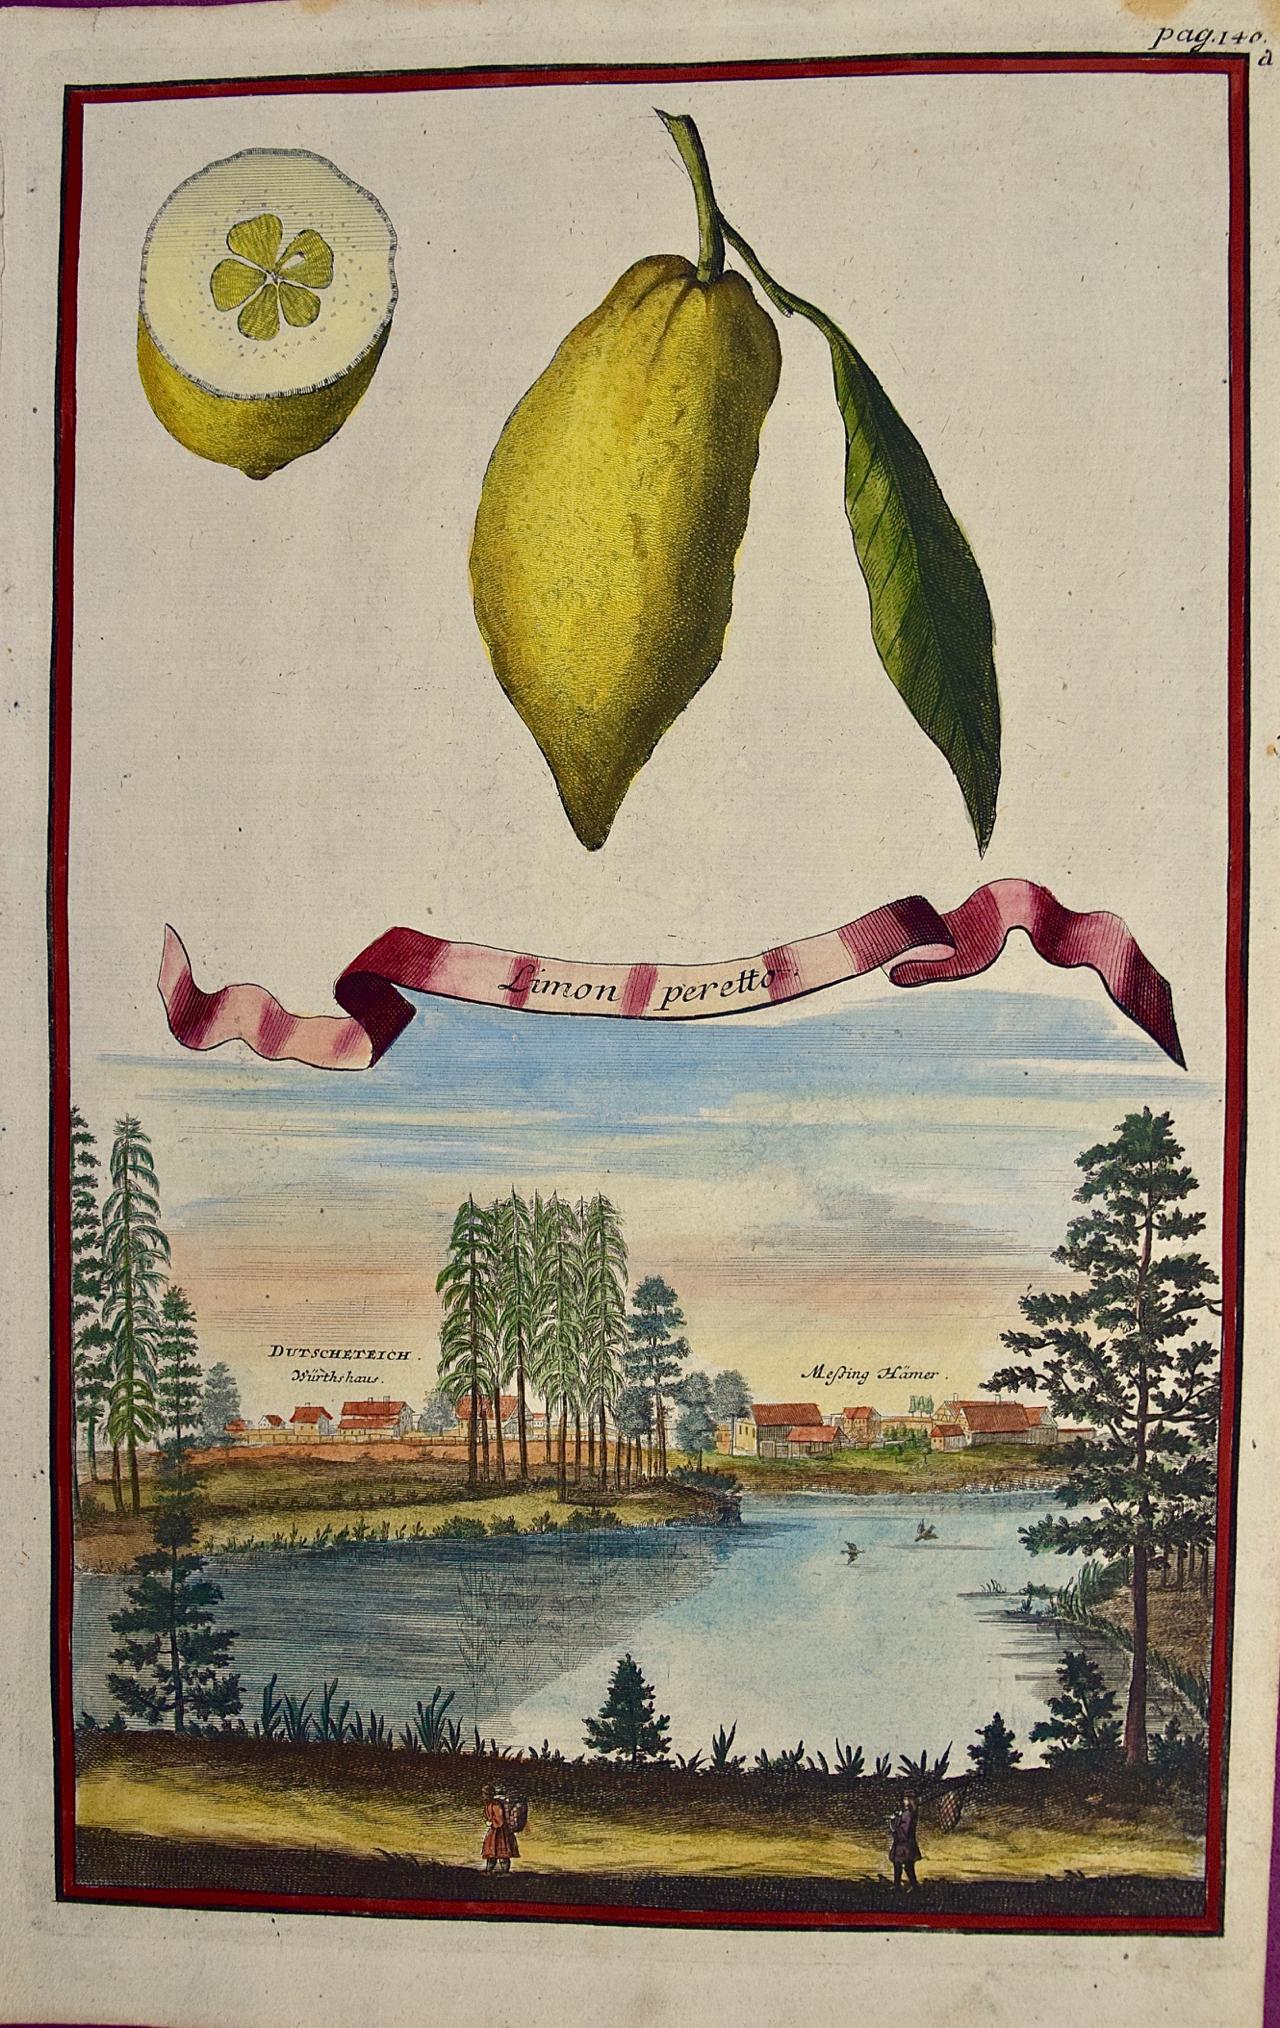 Lemons "Limon Peretto": An Early 18th Century Volckamer Hand-colored Engraving